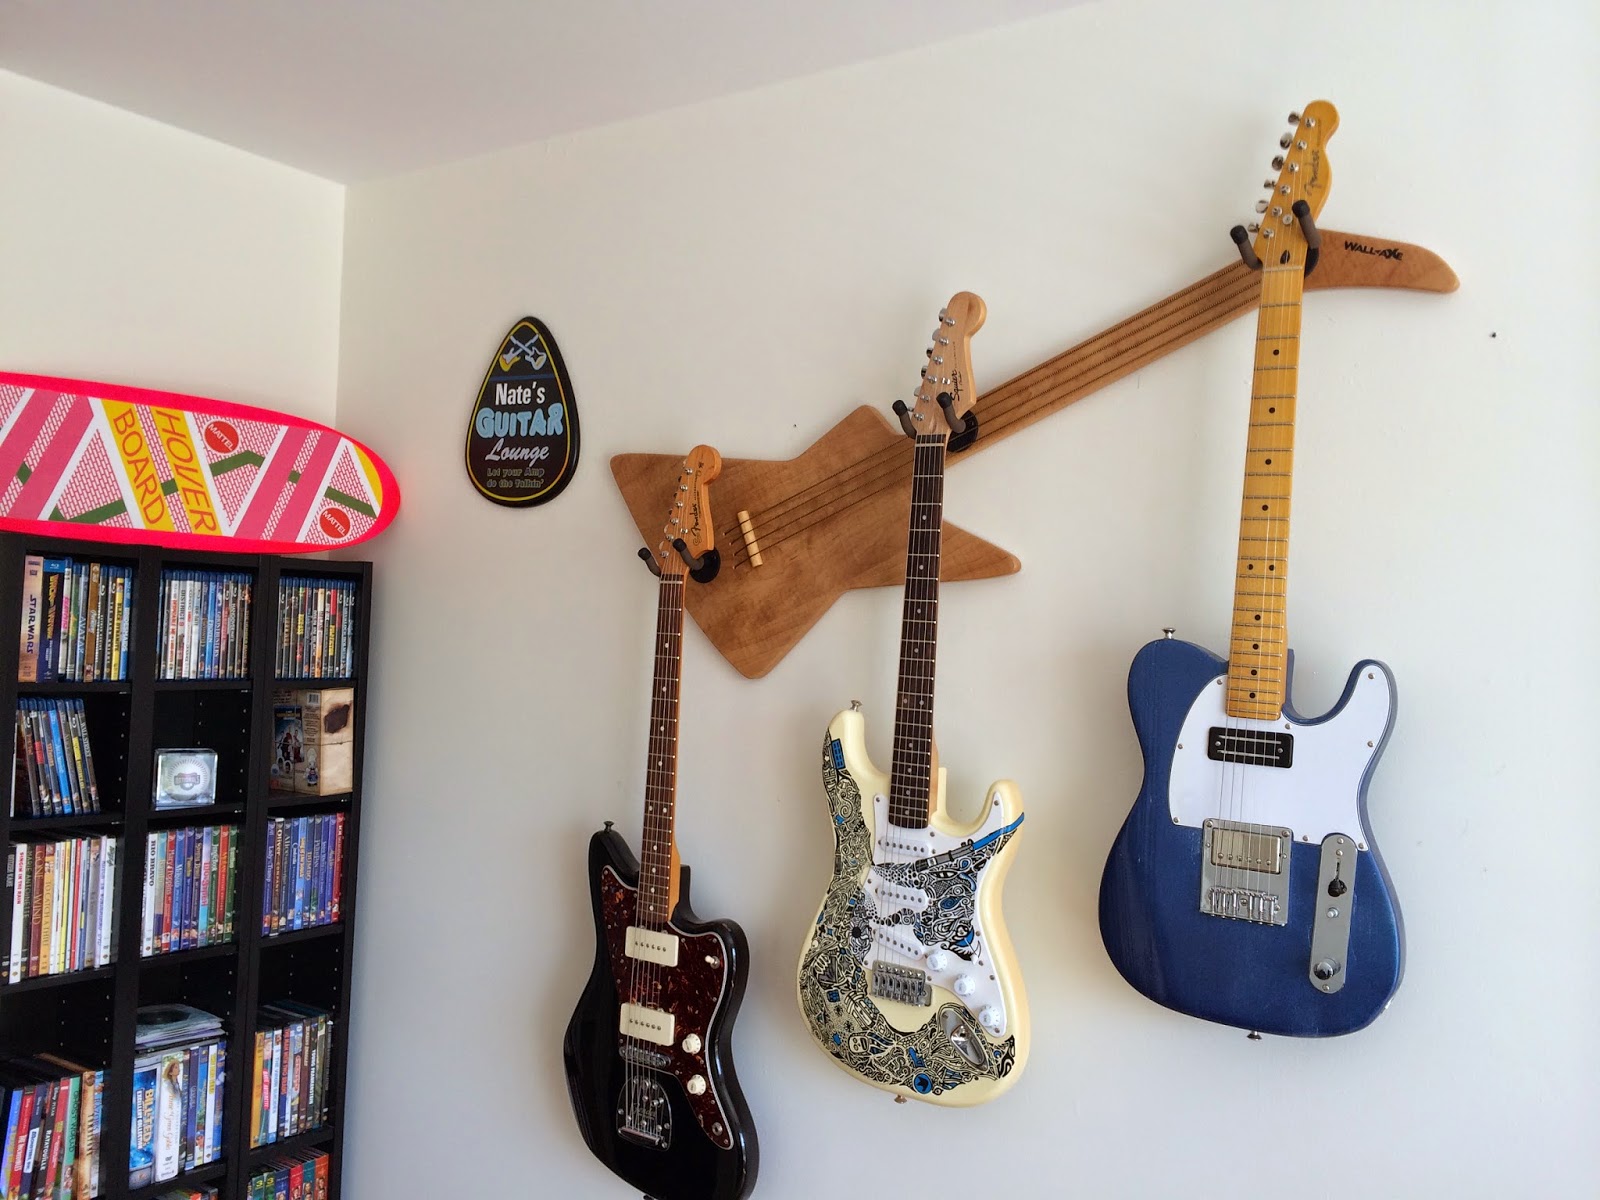 Wall-Axe's McFly LX-Candlelight is perfect for storing guitars in a tiny apartment.